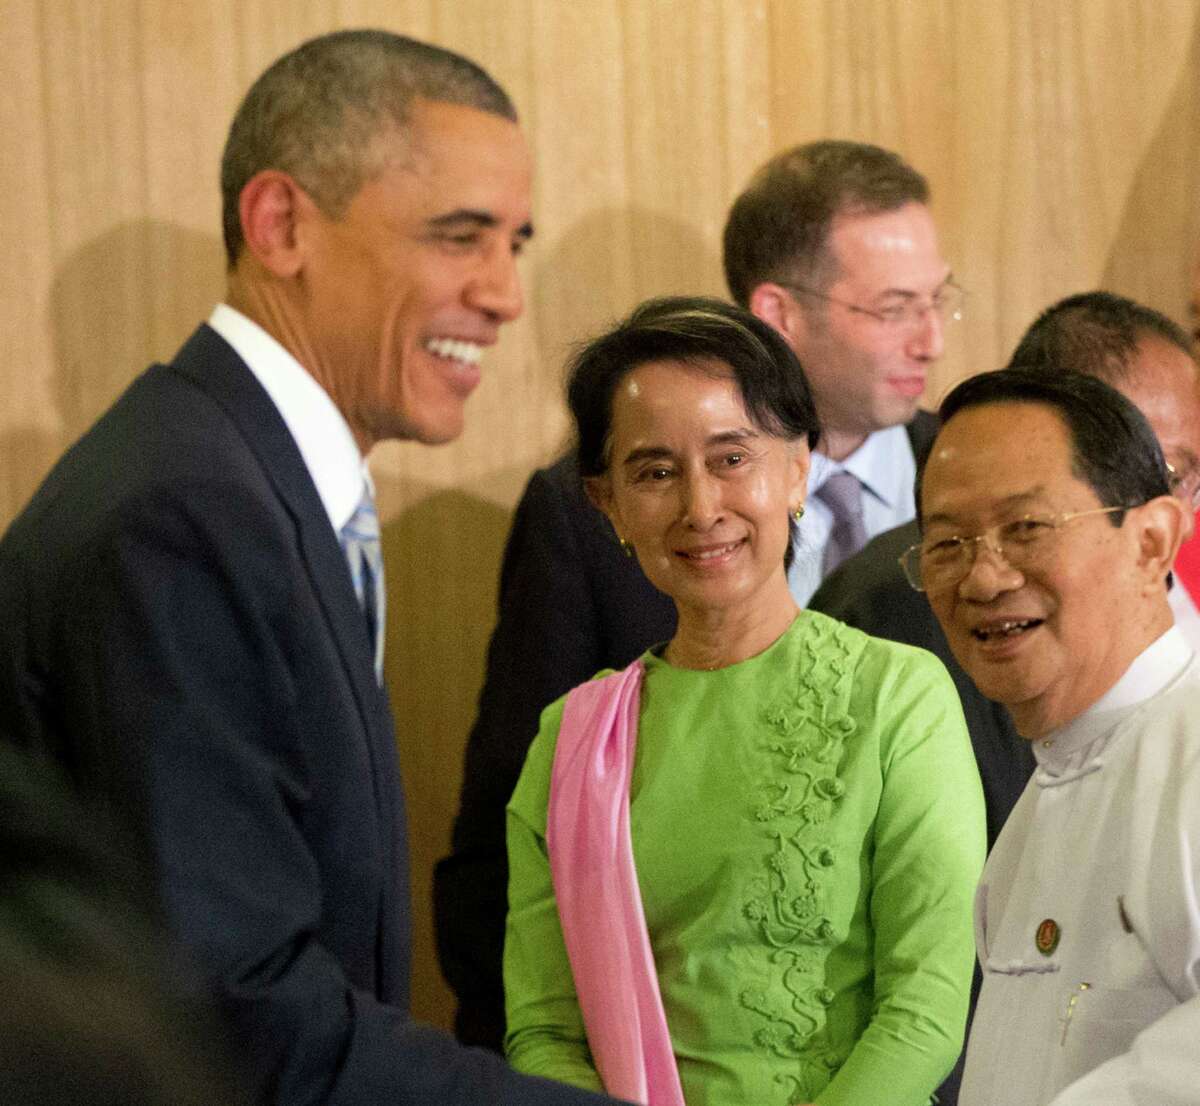 Myanmar's opposition leader Aung San Suu Kyi, center, and President Barack Obama greet participants following a meeting at Parliamentary Resource Center in Naypyitaw, Myanmar. At right is Hla Myint Oo, a member of parliament.